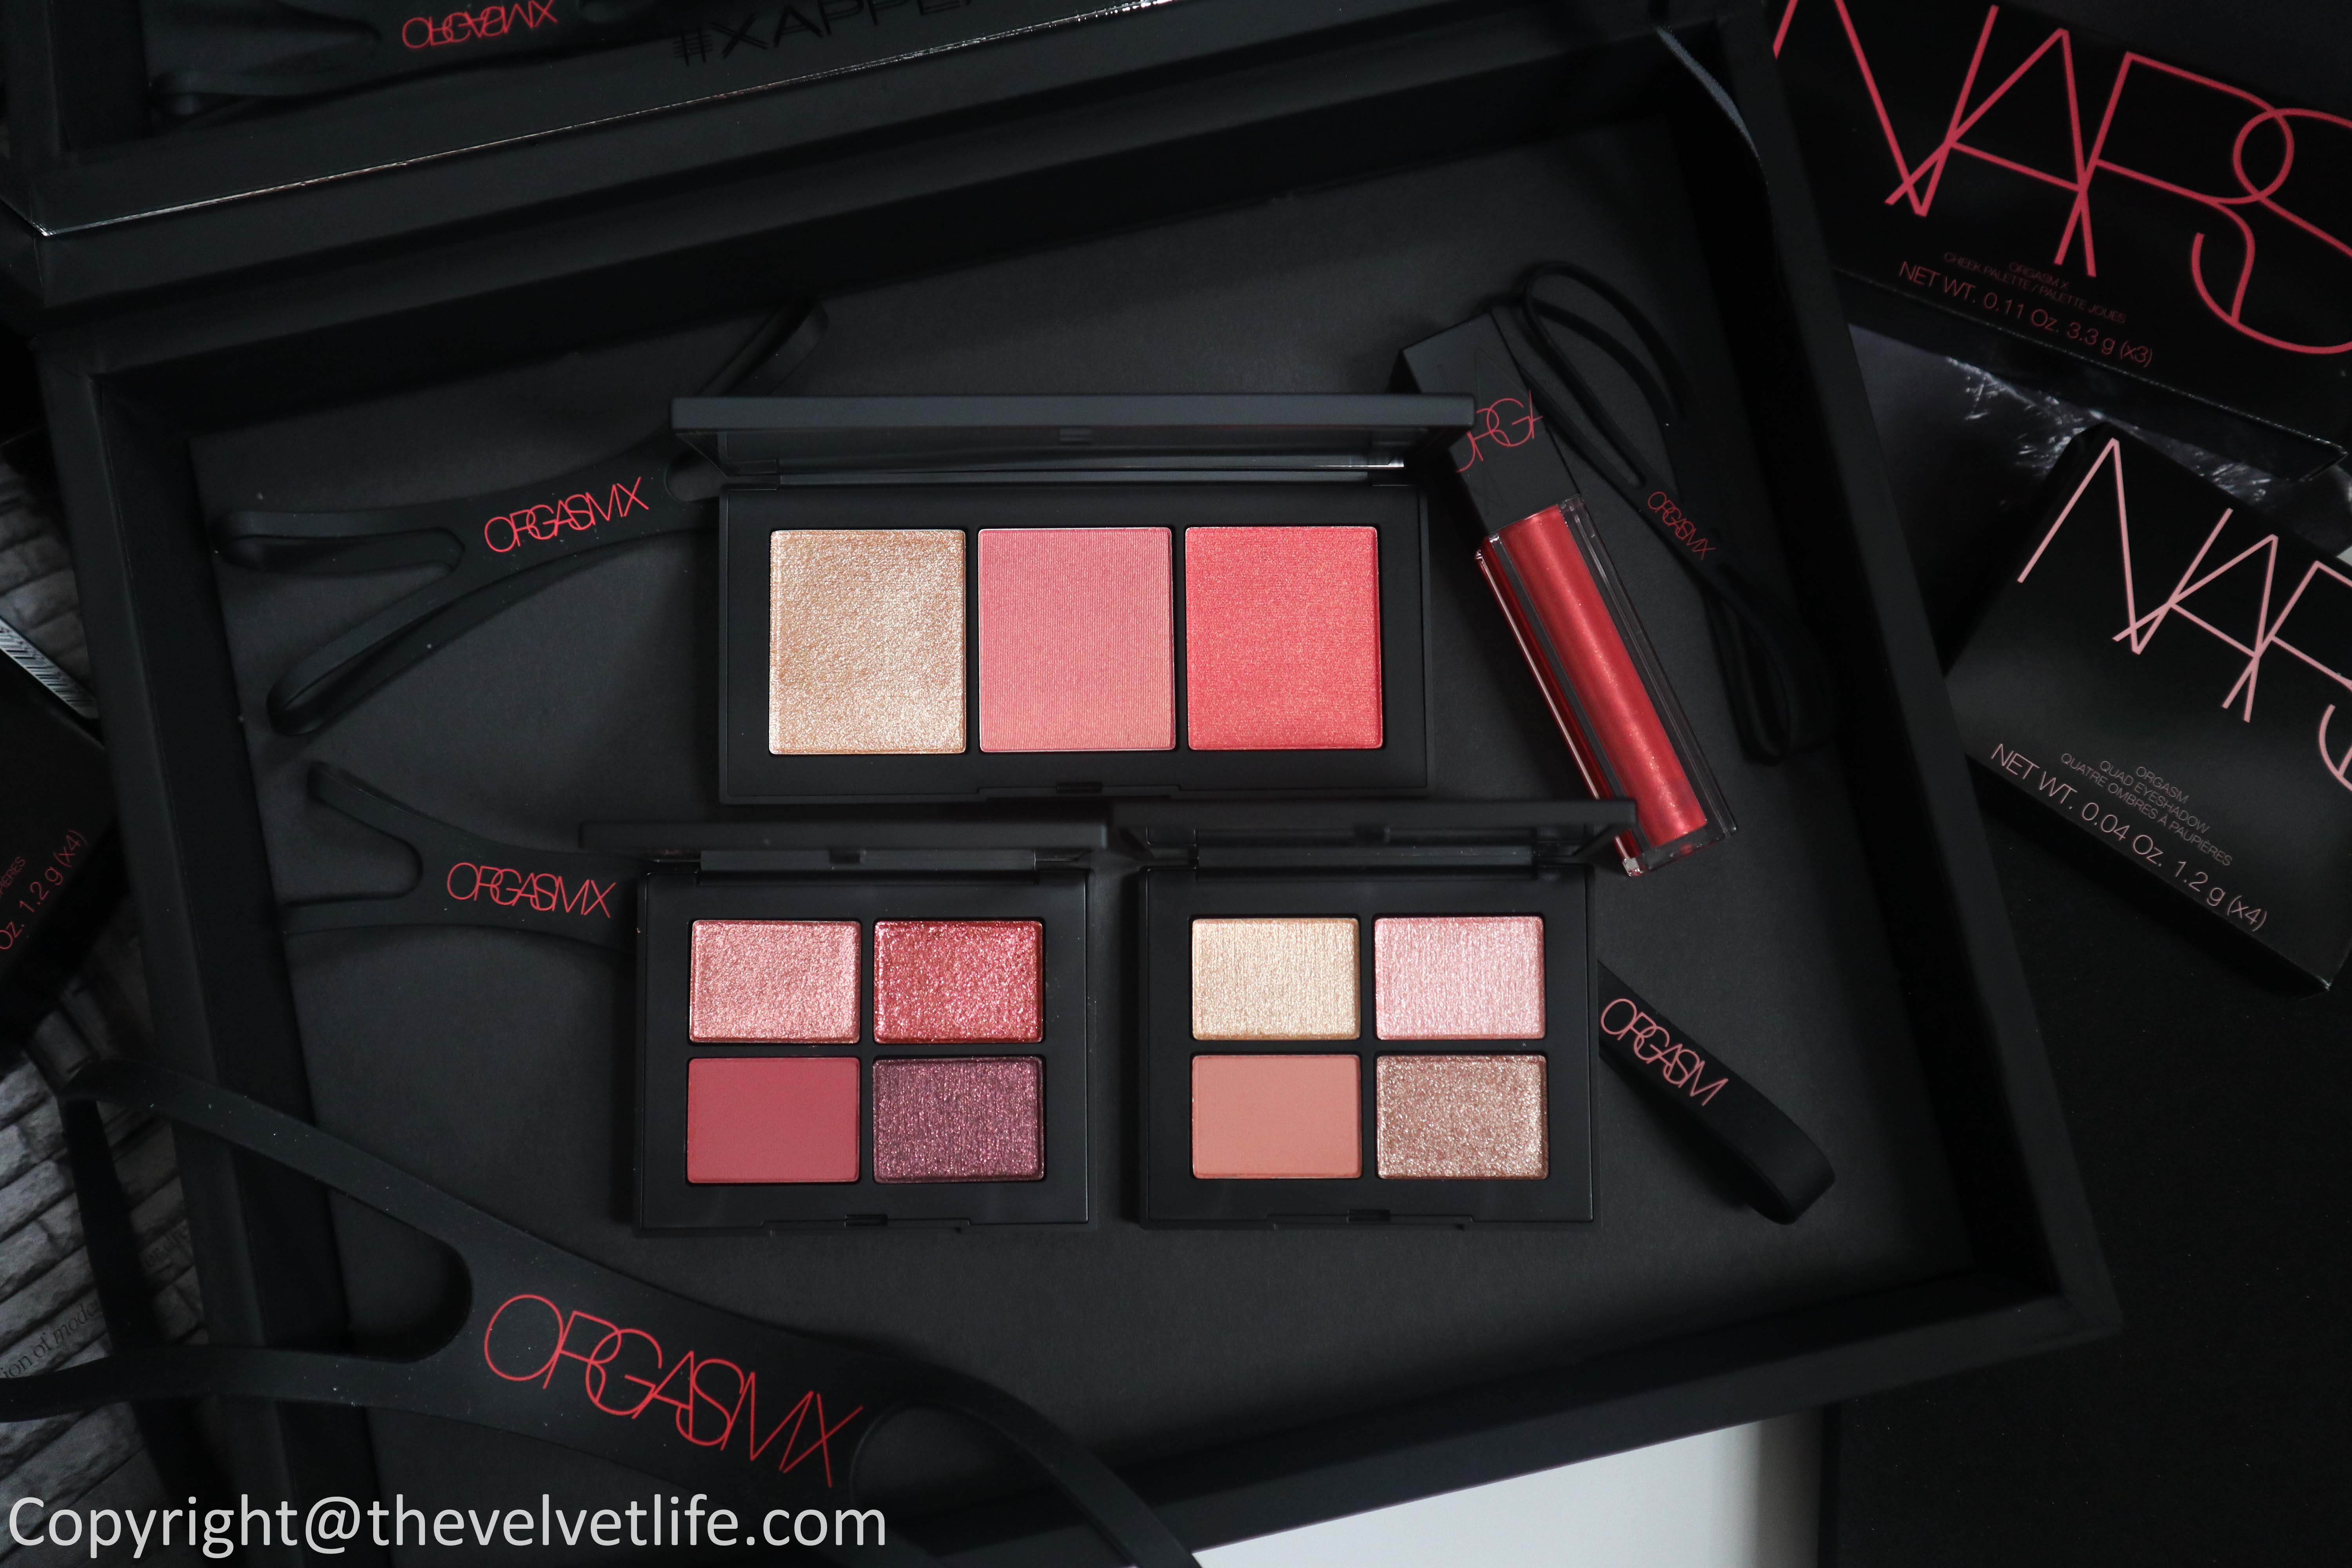 New Nars Orgasm X Collection review swatches Orgasm X Cheek Palette, Orgasm Quad Eyeshadow palette, Oil-infused Lip Tint in Orgasm X